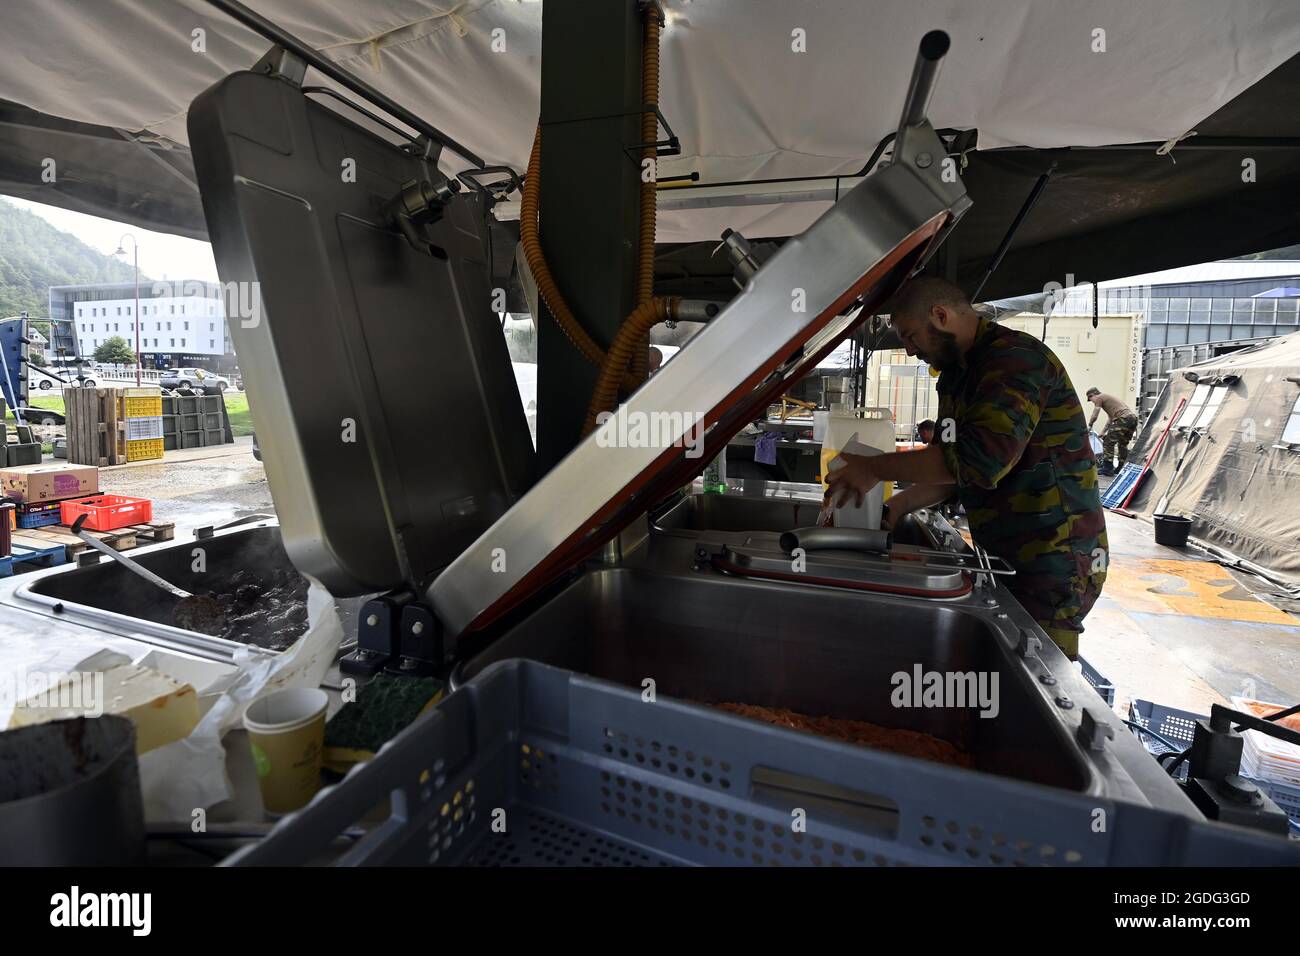 Illustration shows  a mobile kitchen installed and ran by the army, in the 'Parc des Sources', in Chaudfontaine on Friday 13 August 2021. The region w Stock Photo